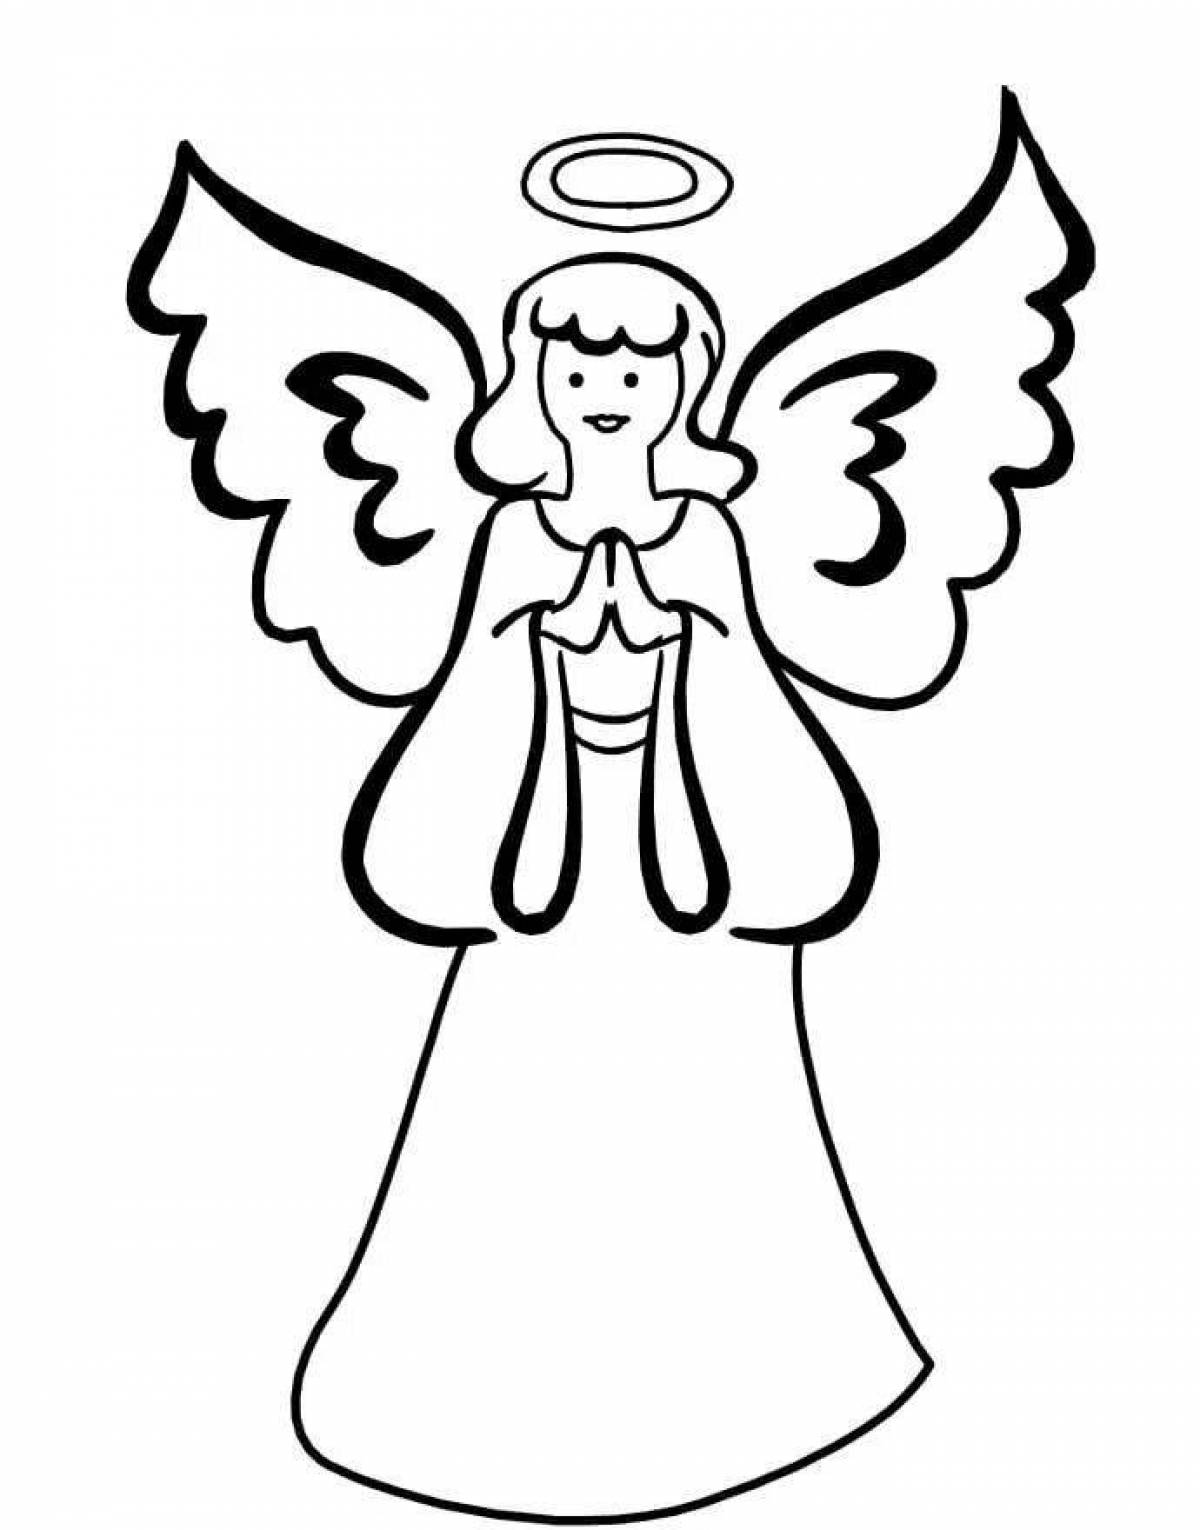 Blessed Christmas angel coloring page